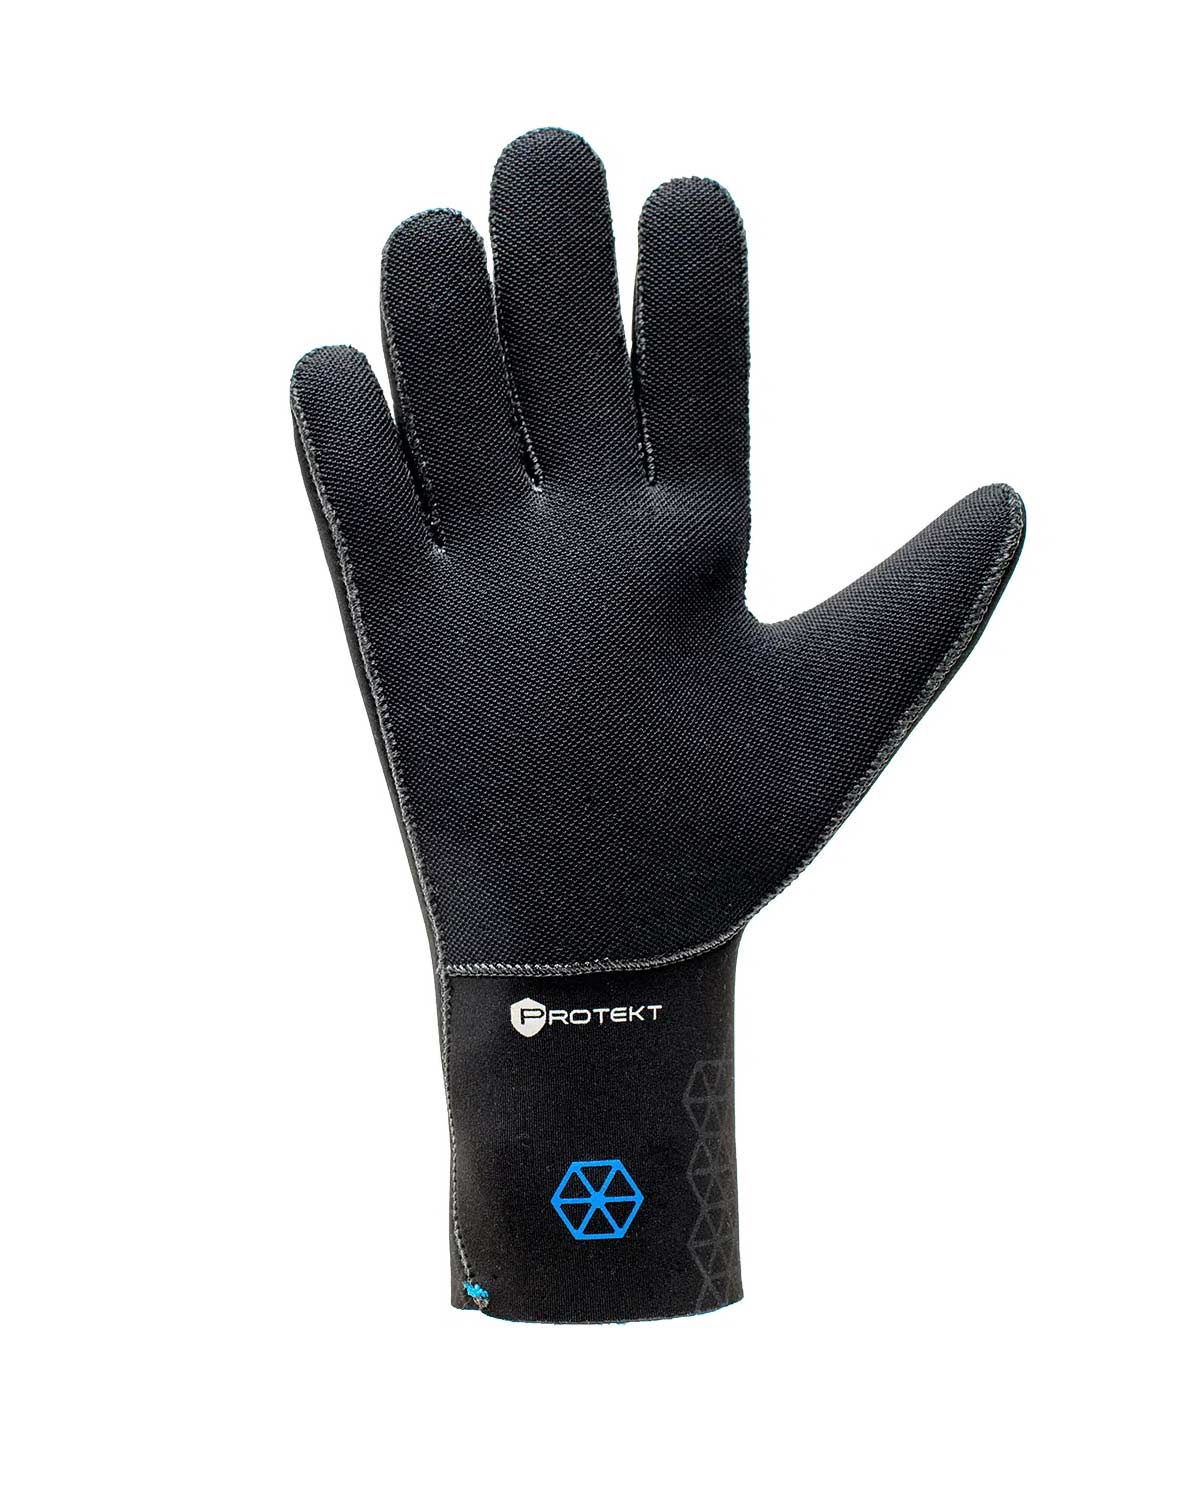 5mm BARE Wetsuit Gloves